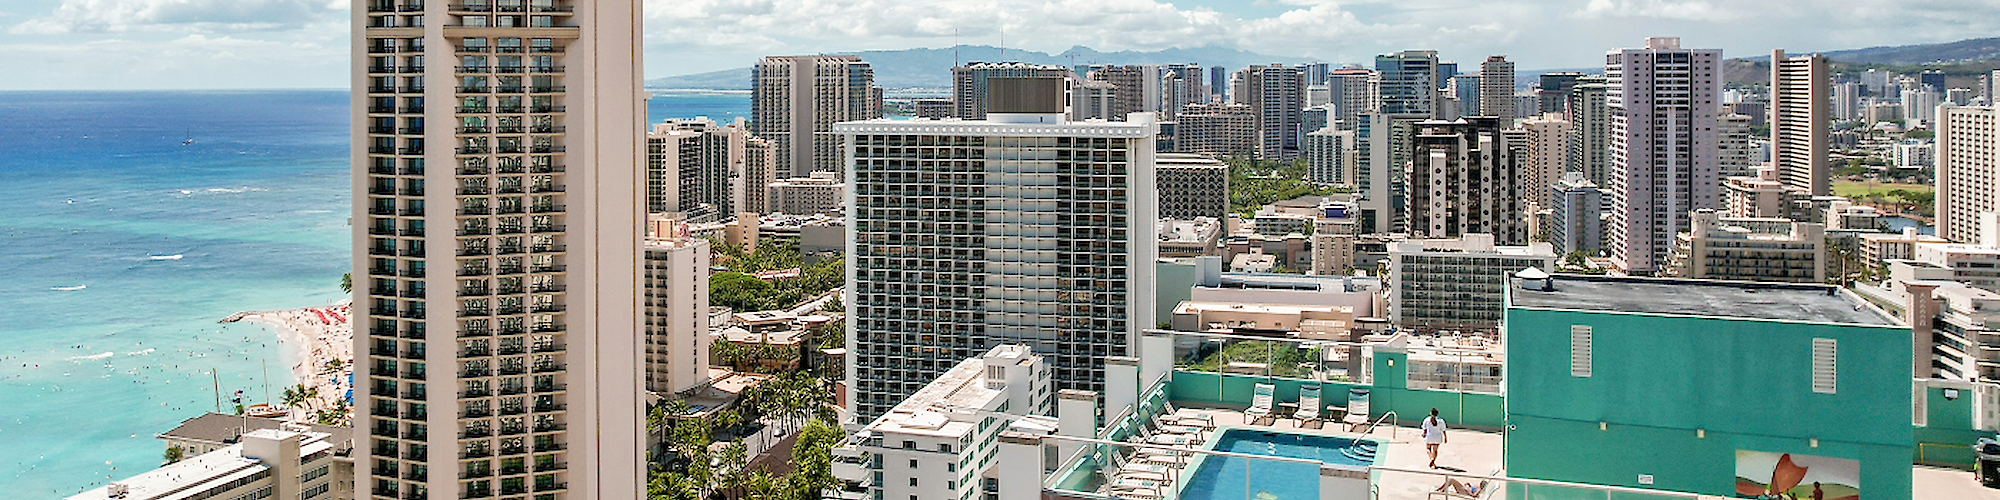 The image shows a skyline with numerous high-rise buildings near a coastline, some of which have rooftop pools, under a clear, blue sky.